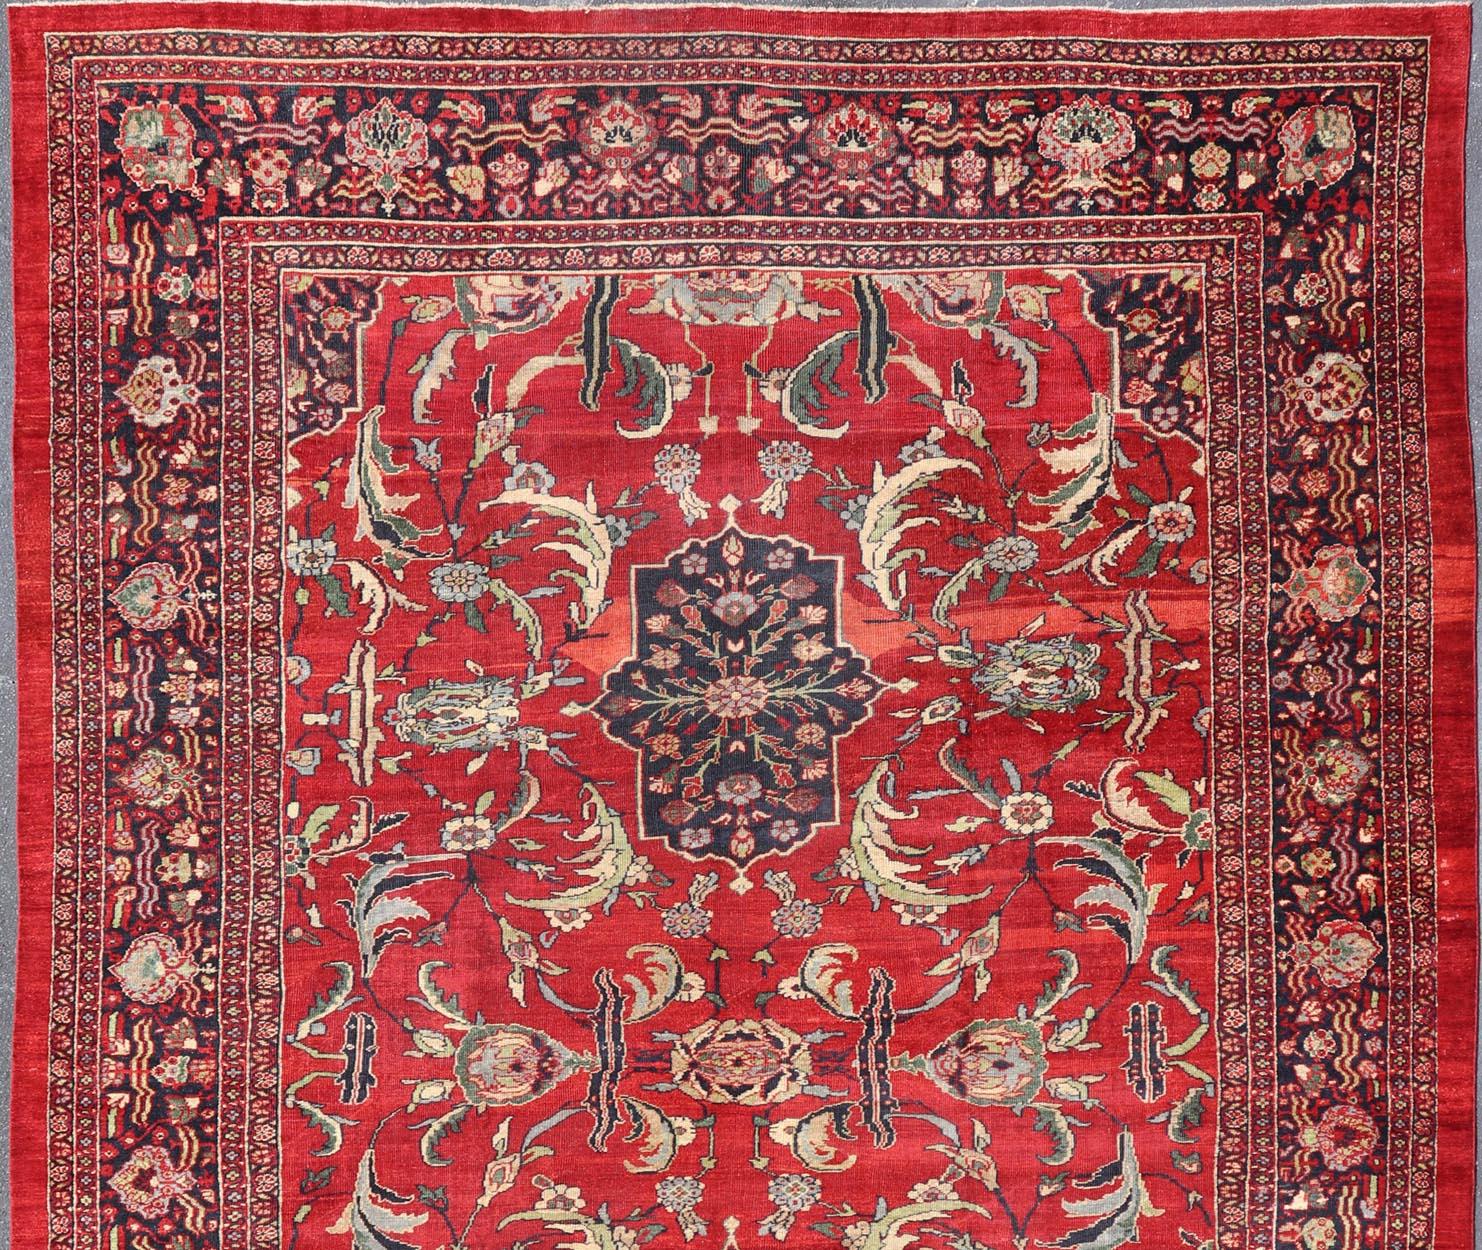 Antique Persian Ziegler Sultanabad Rug with Botanical Elements Set on Red Field. Keivan Woven Arts / rug TRA-120701, country of origin / type: Iran / Ziegler Sultanabad, circa 1900. Antique Ziegler, Antique Sultanabad  

Measures: 12'3 x 18'3.   